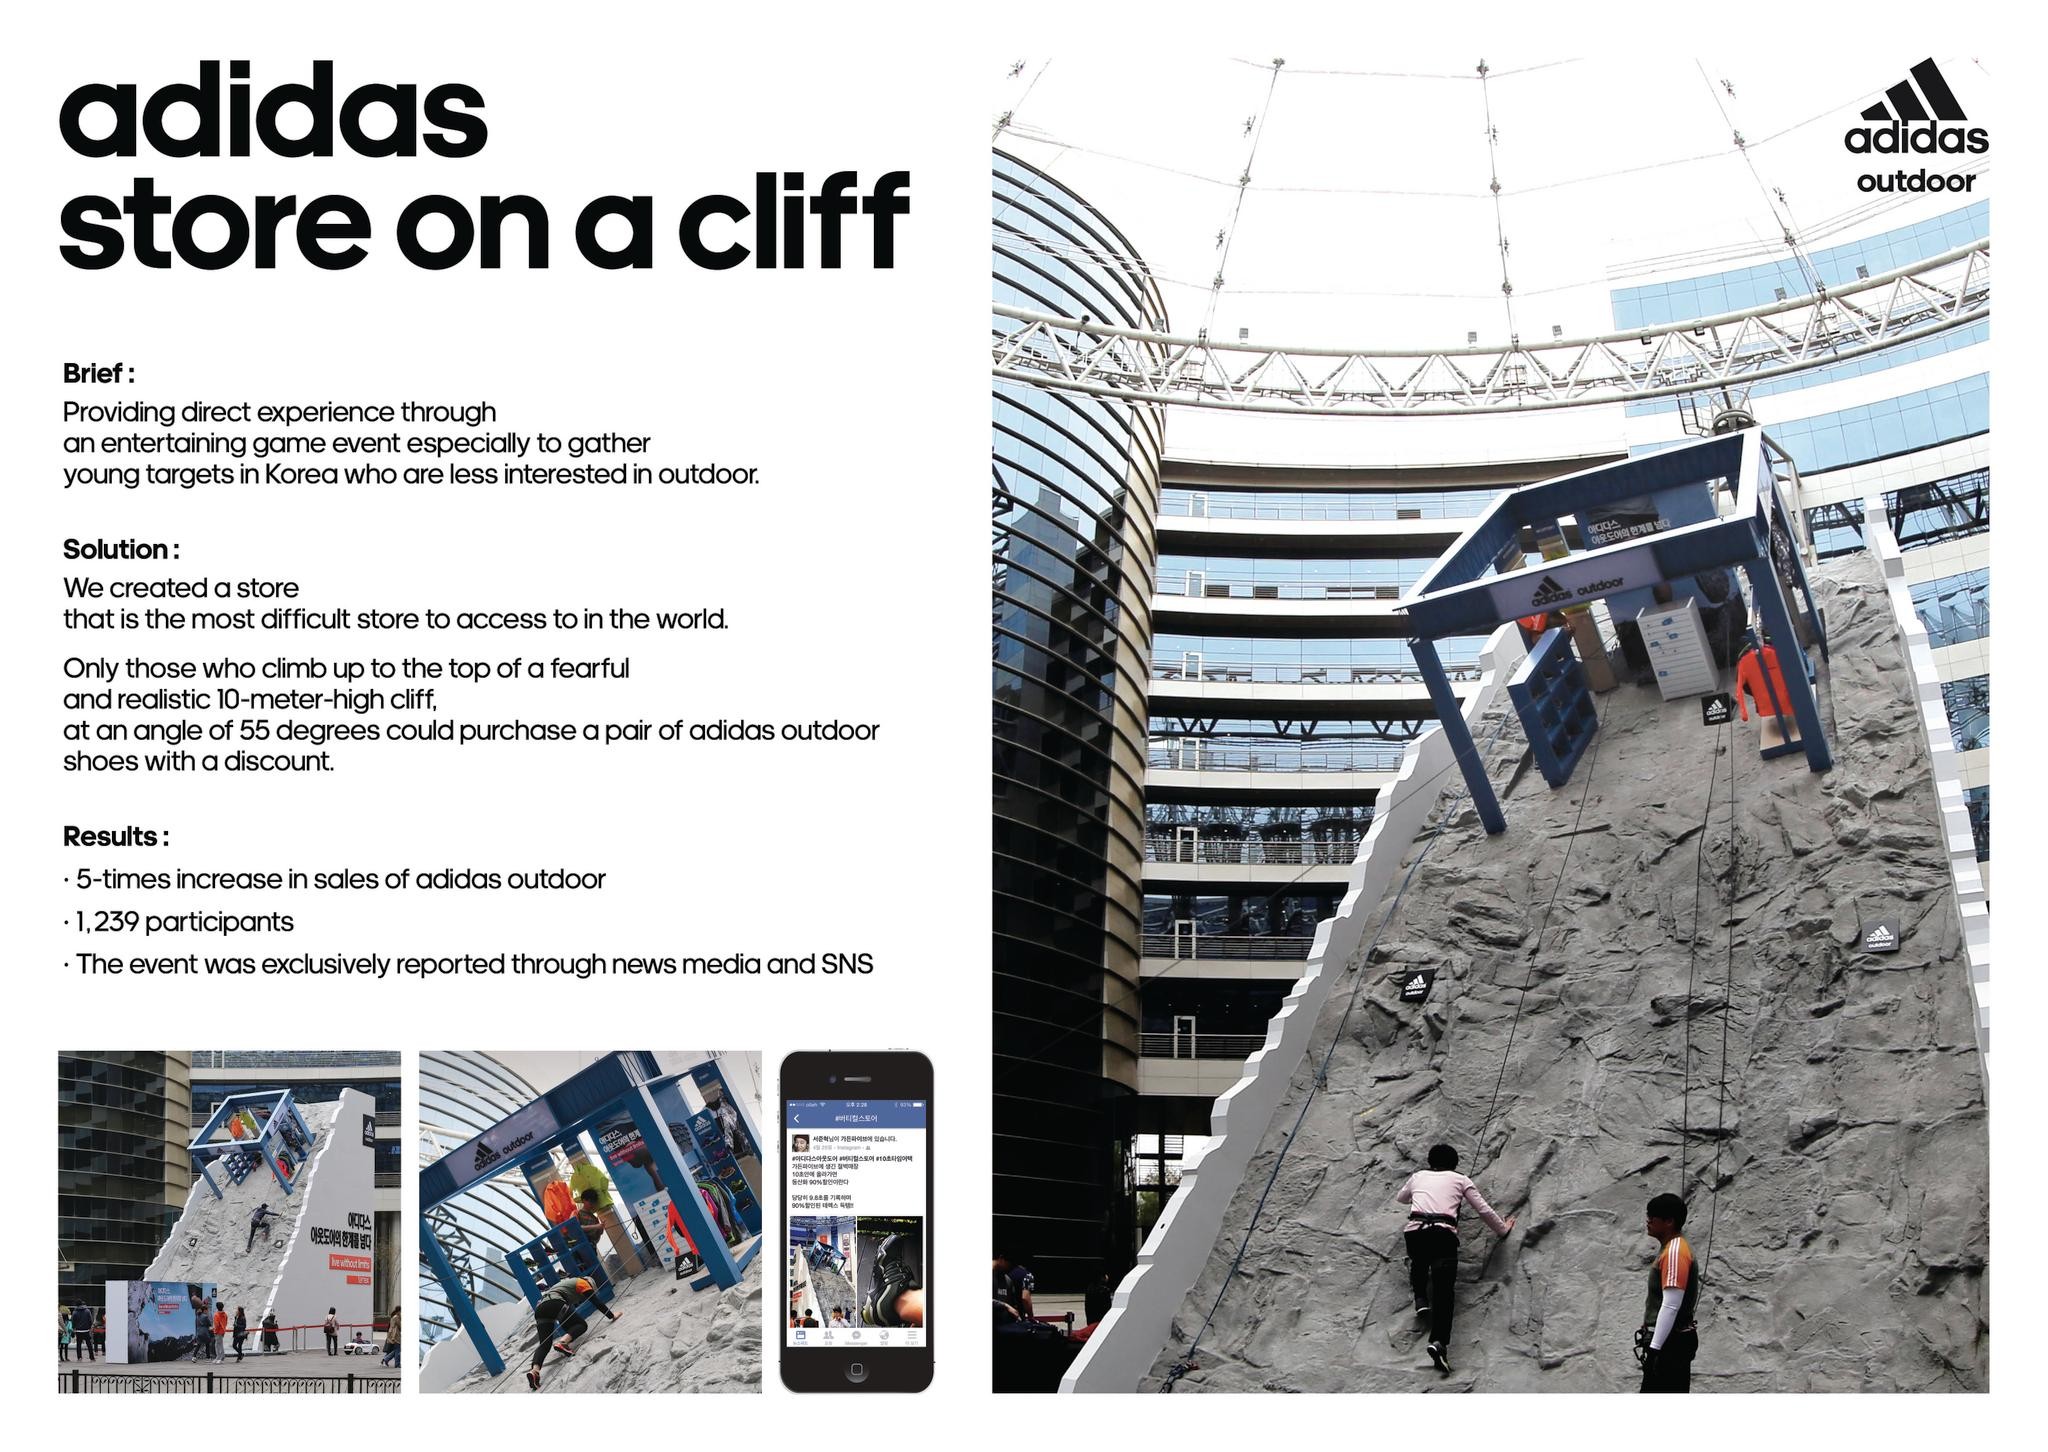 ADIDAS OUTDOOR – STORE ON A CLIFF